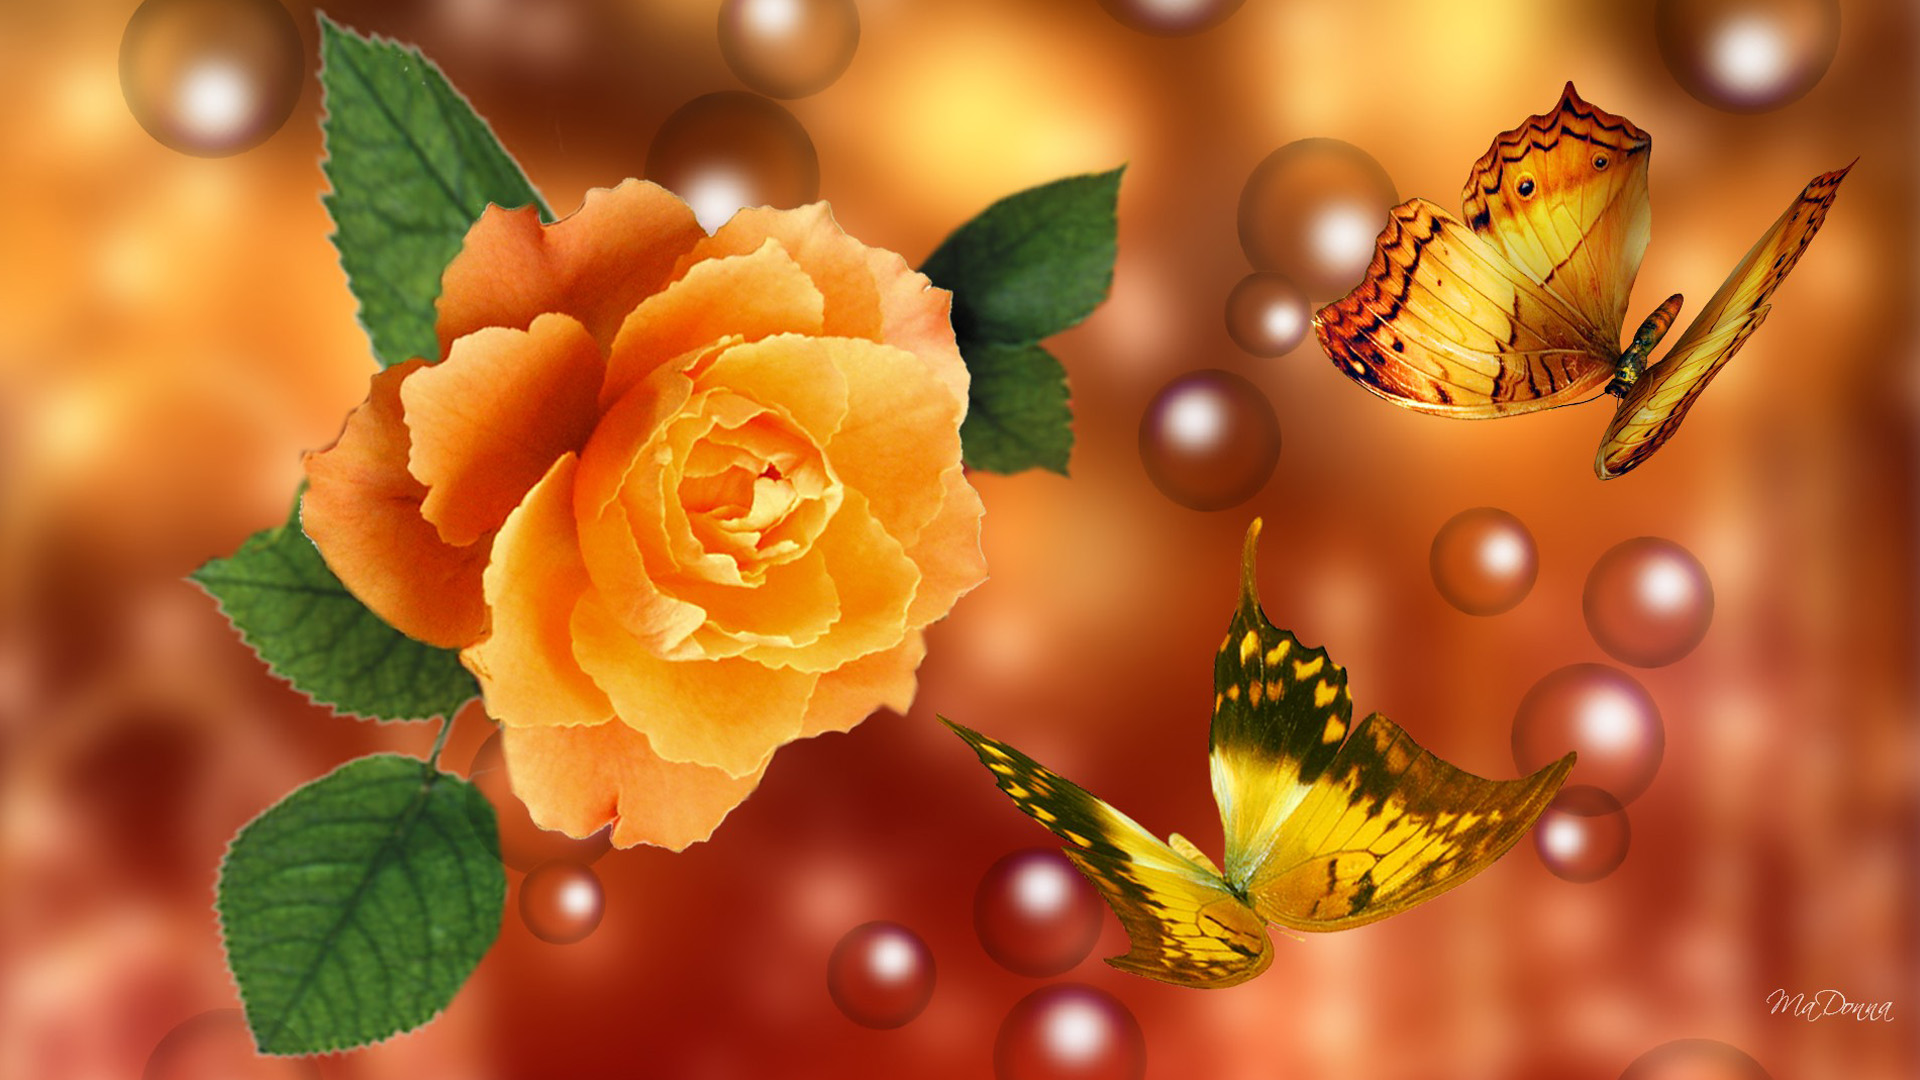 red rose live wallpaper free download,yellow,flower,plant,butterfly,orange